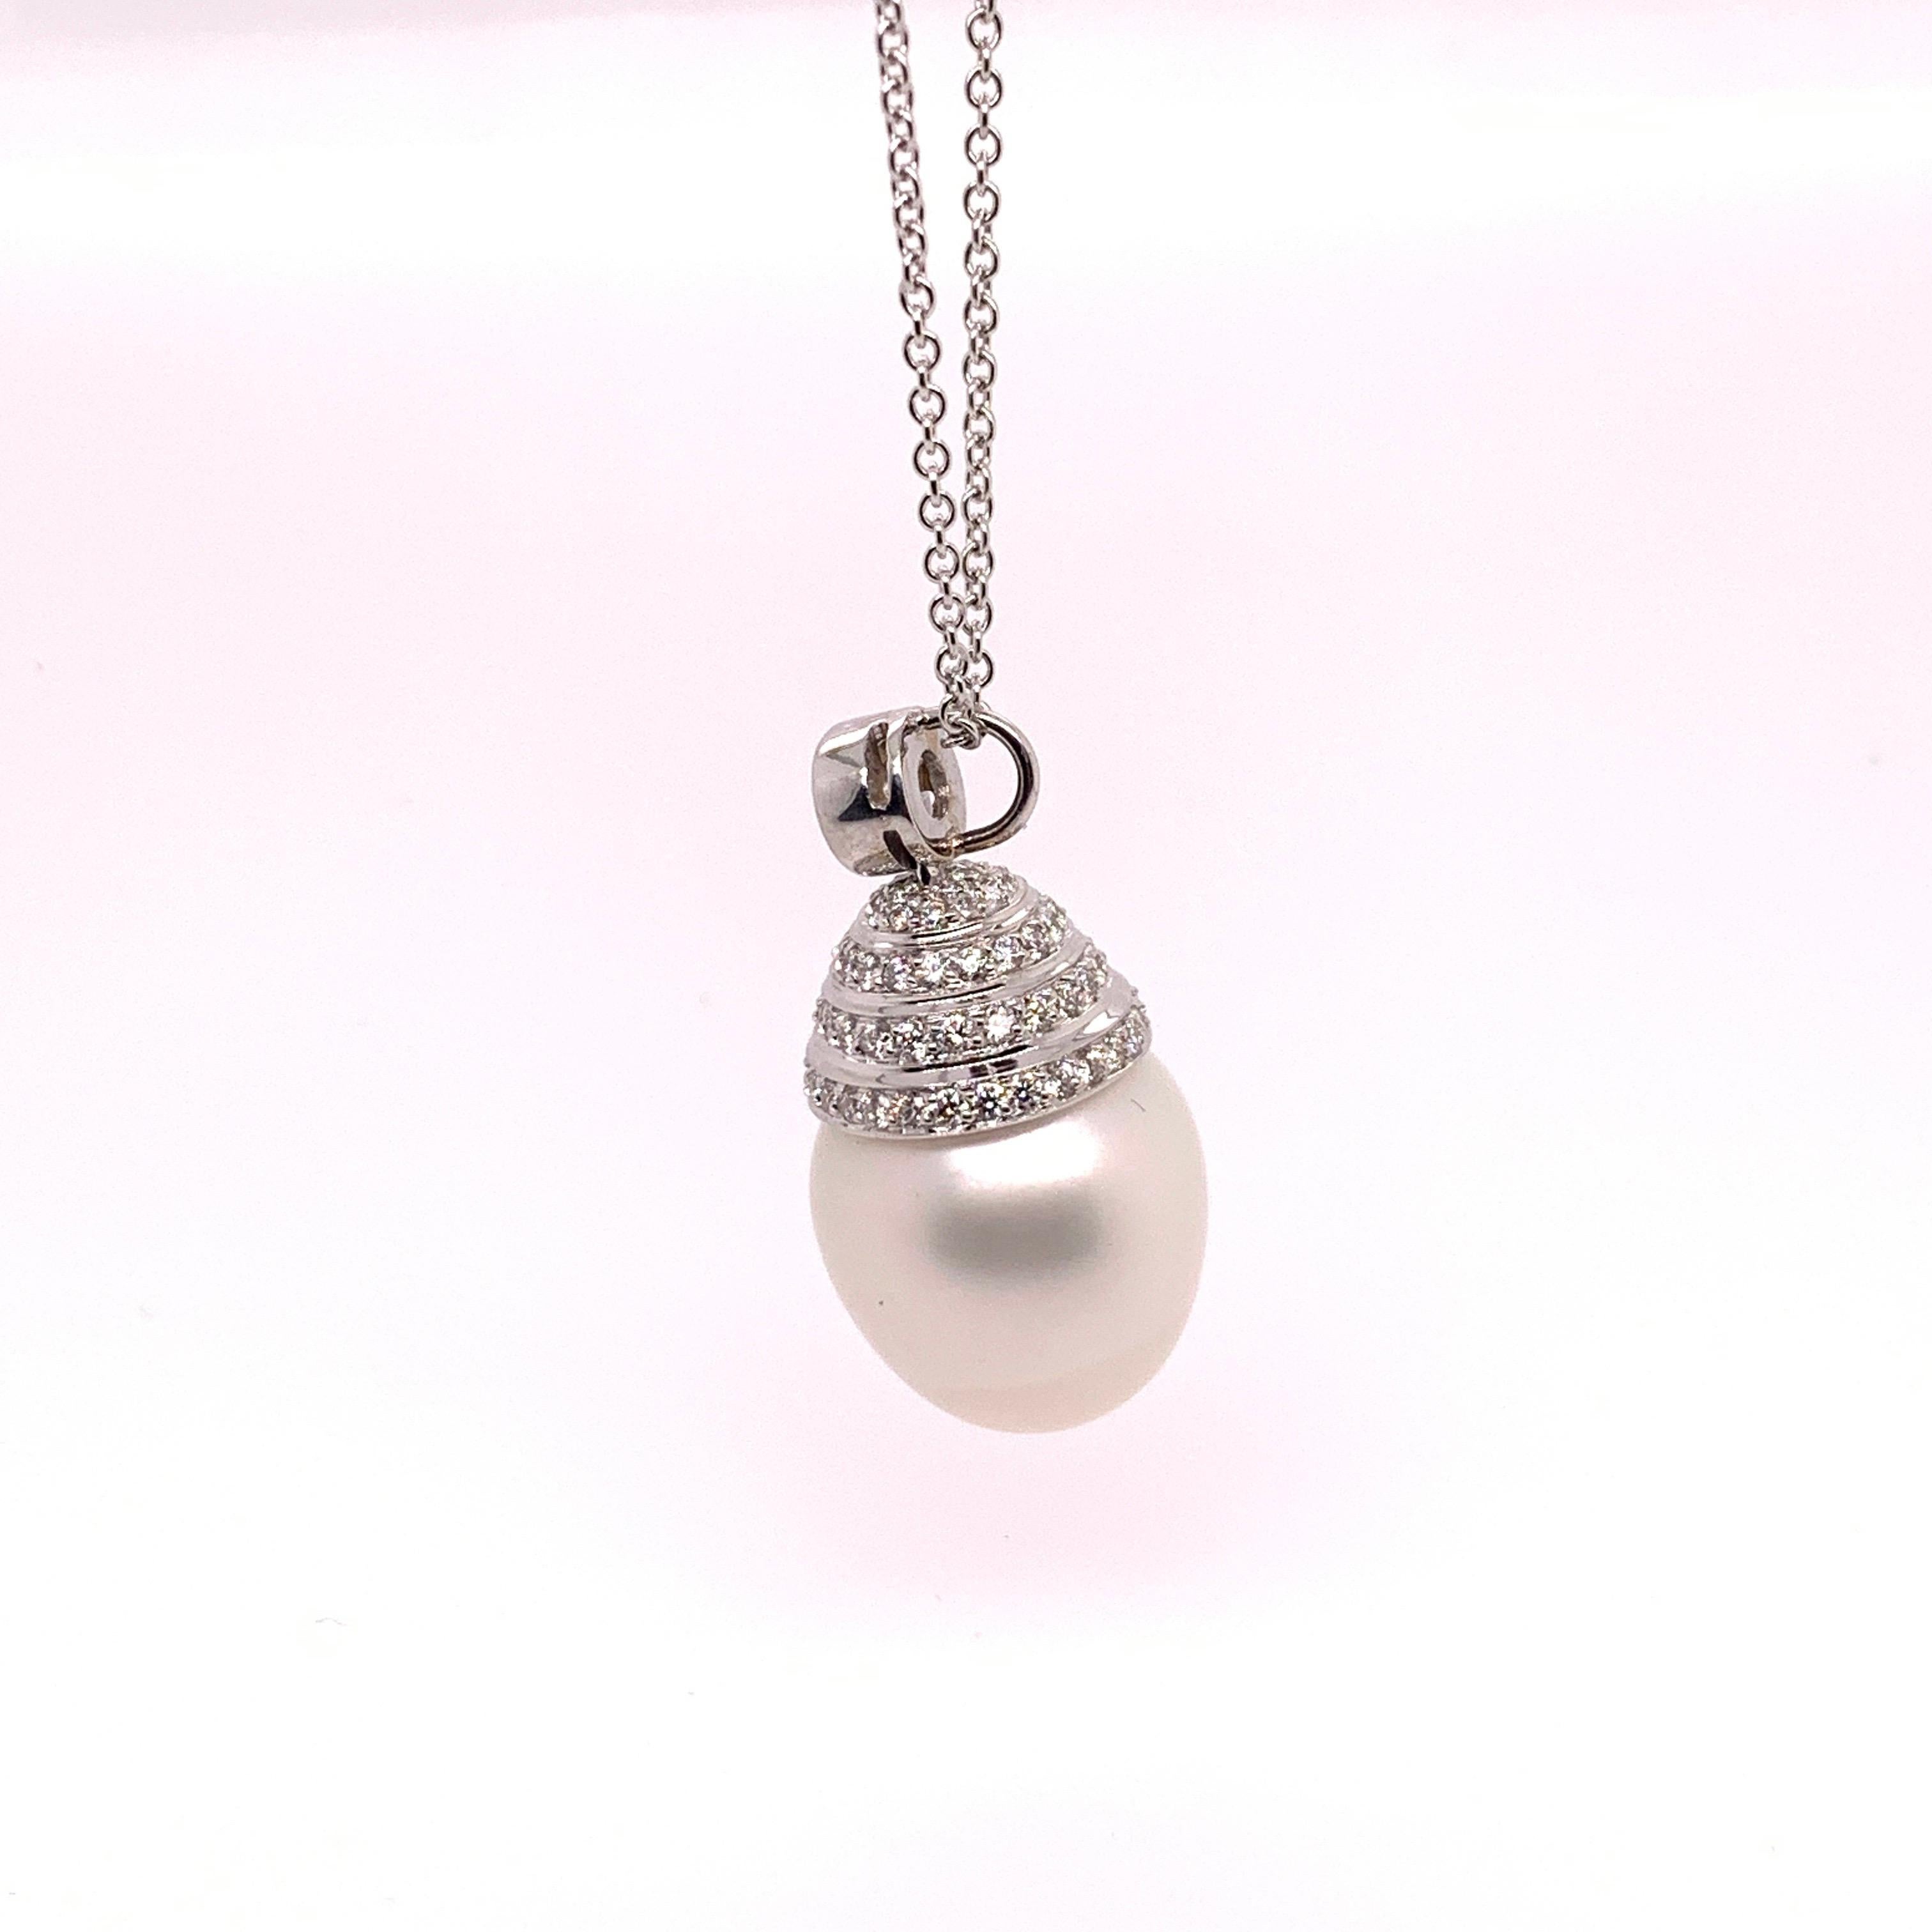 An 18k Gold Pendant set with 88 colorless Natural Round Brilliant diamonds. The pearl is 15mm and the piece weighs 11 grams. 